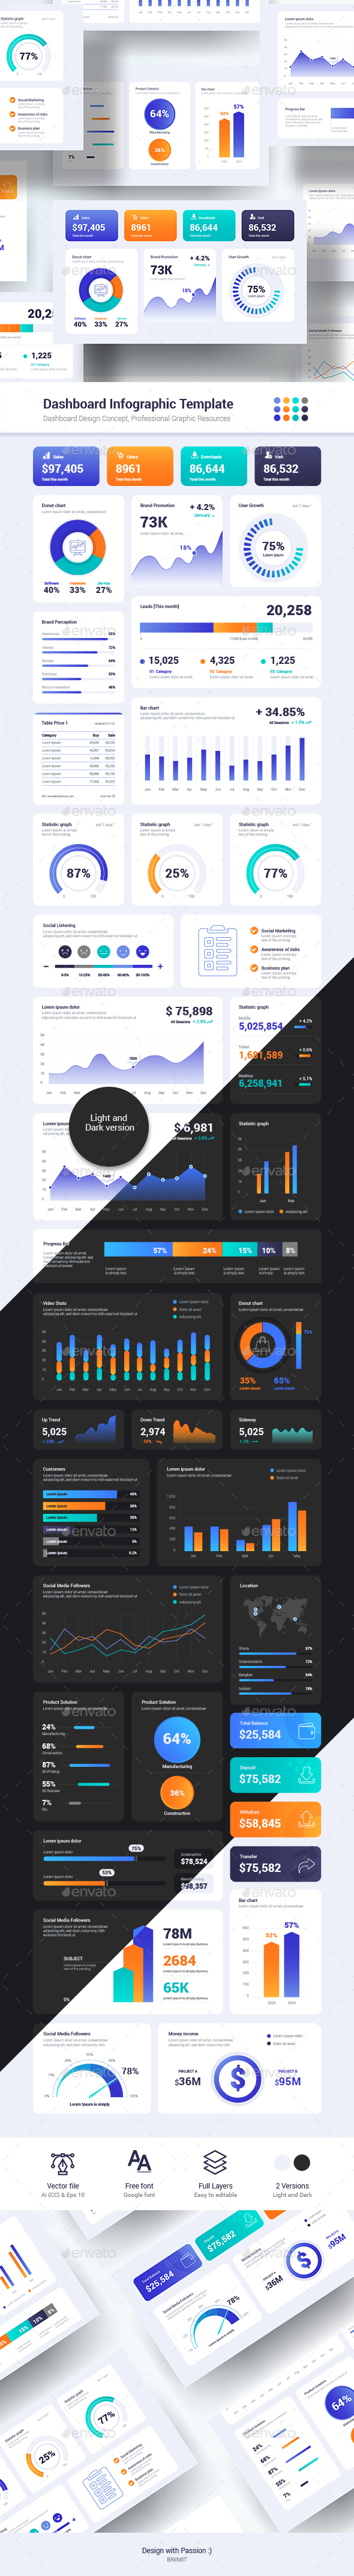 [DOWNLOAD]Dashboard Infographic Template